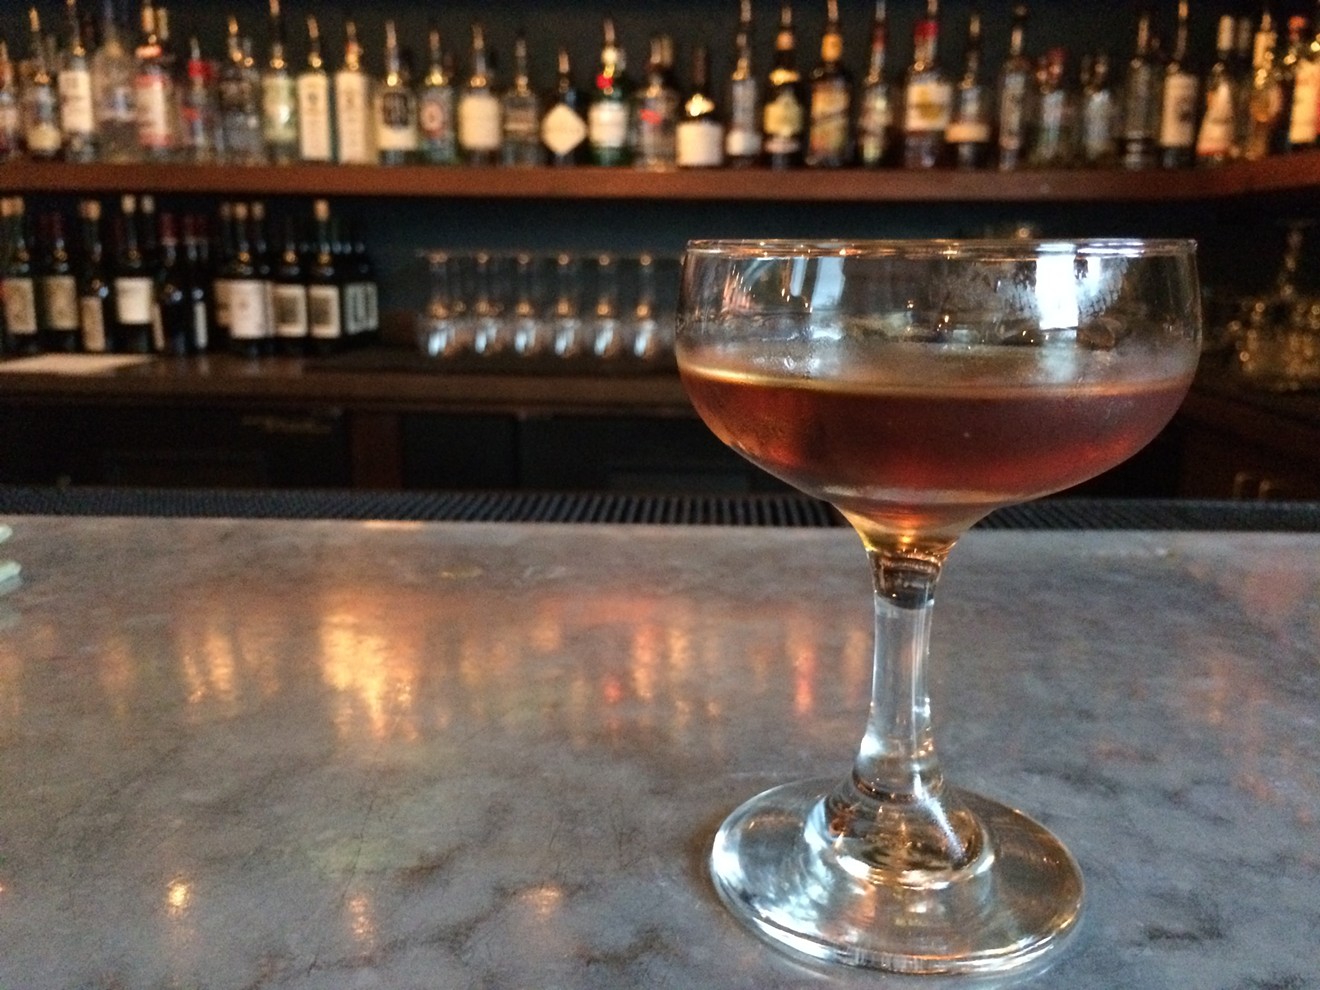 The Corpse Reviver #1 was created by Harry Craddock at the Savoy Hotel in London.